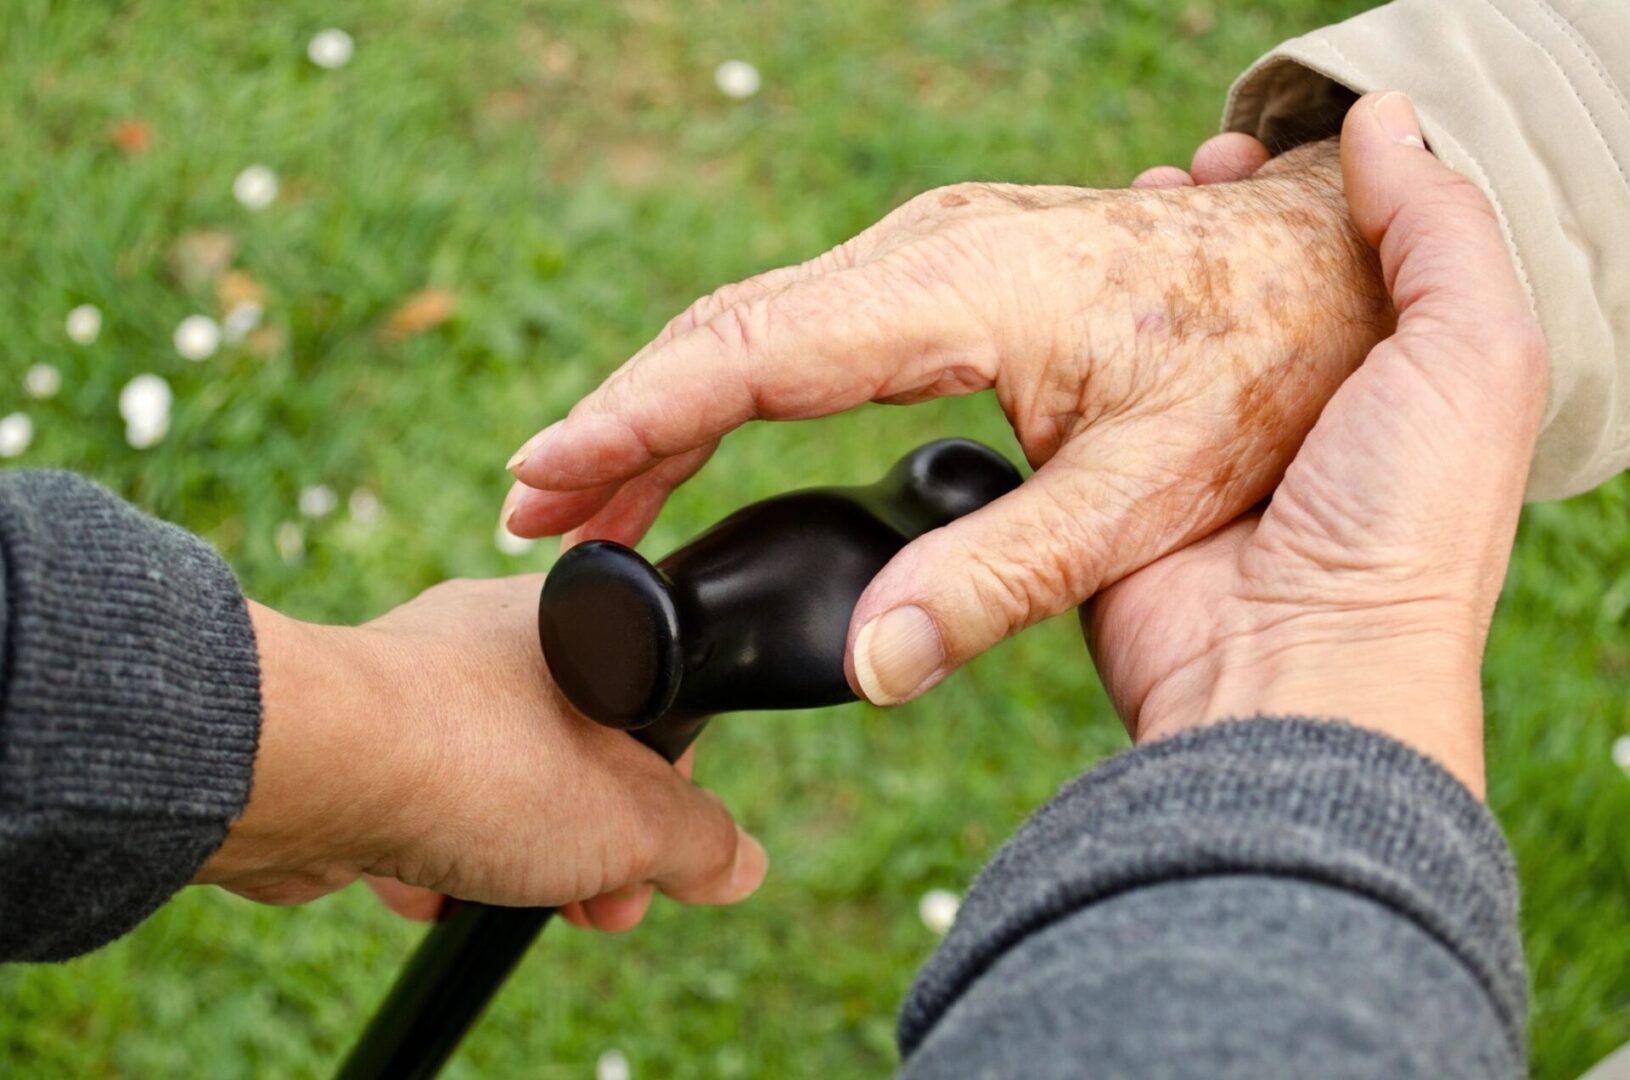 Giving a cane to an senior adult